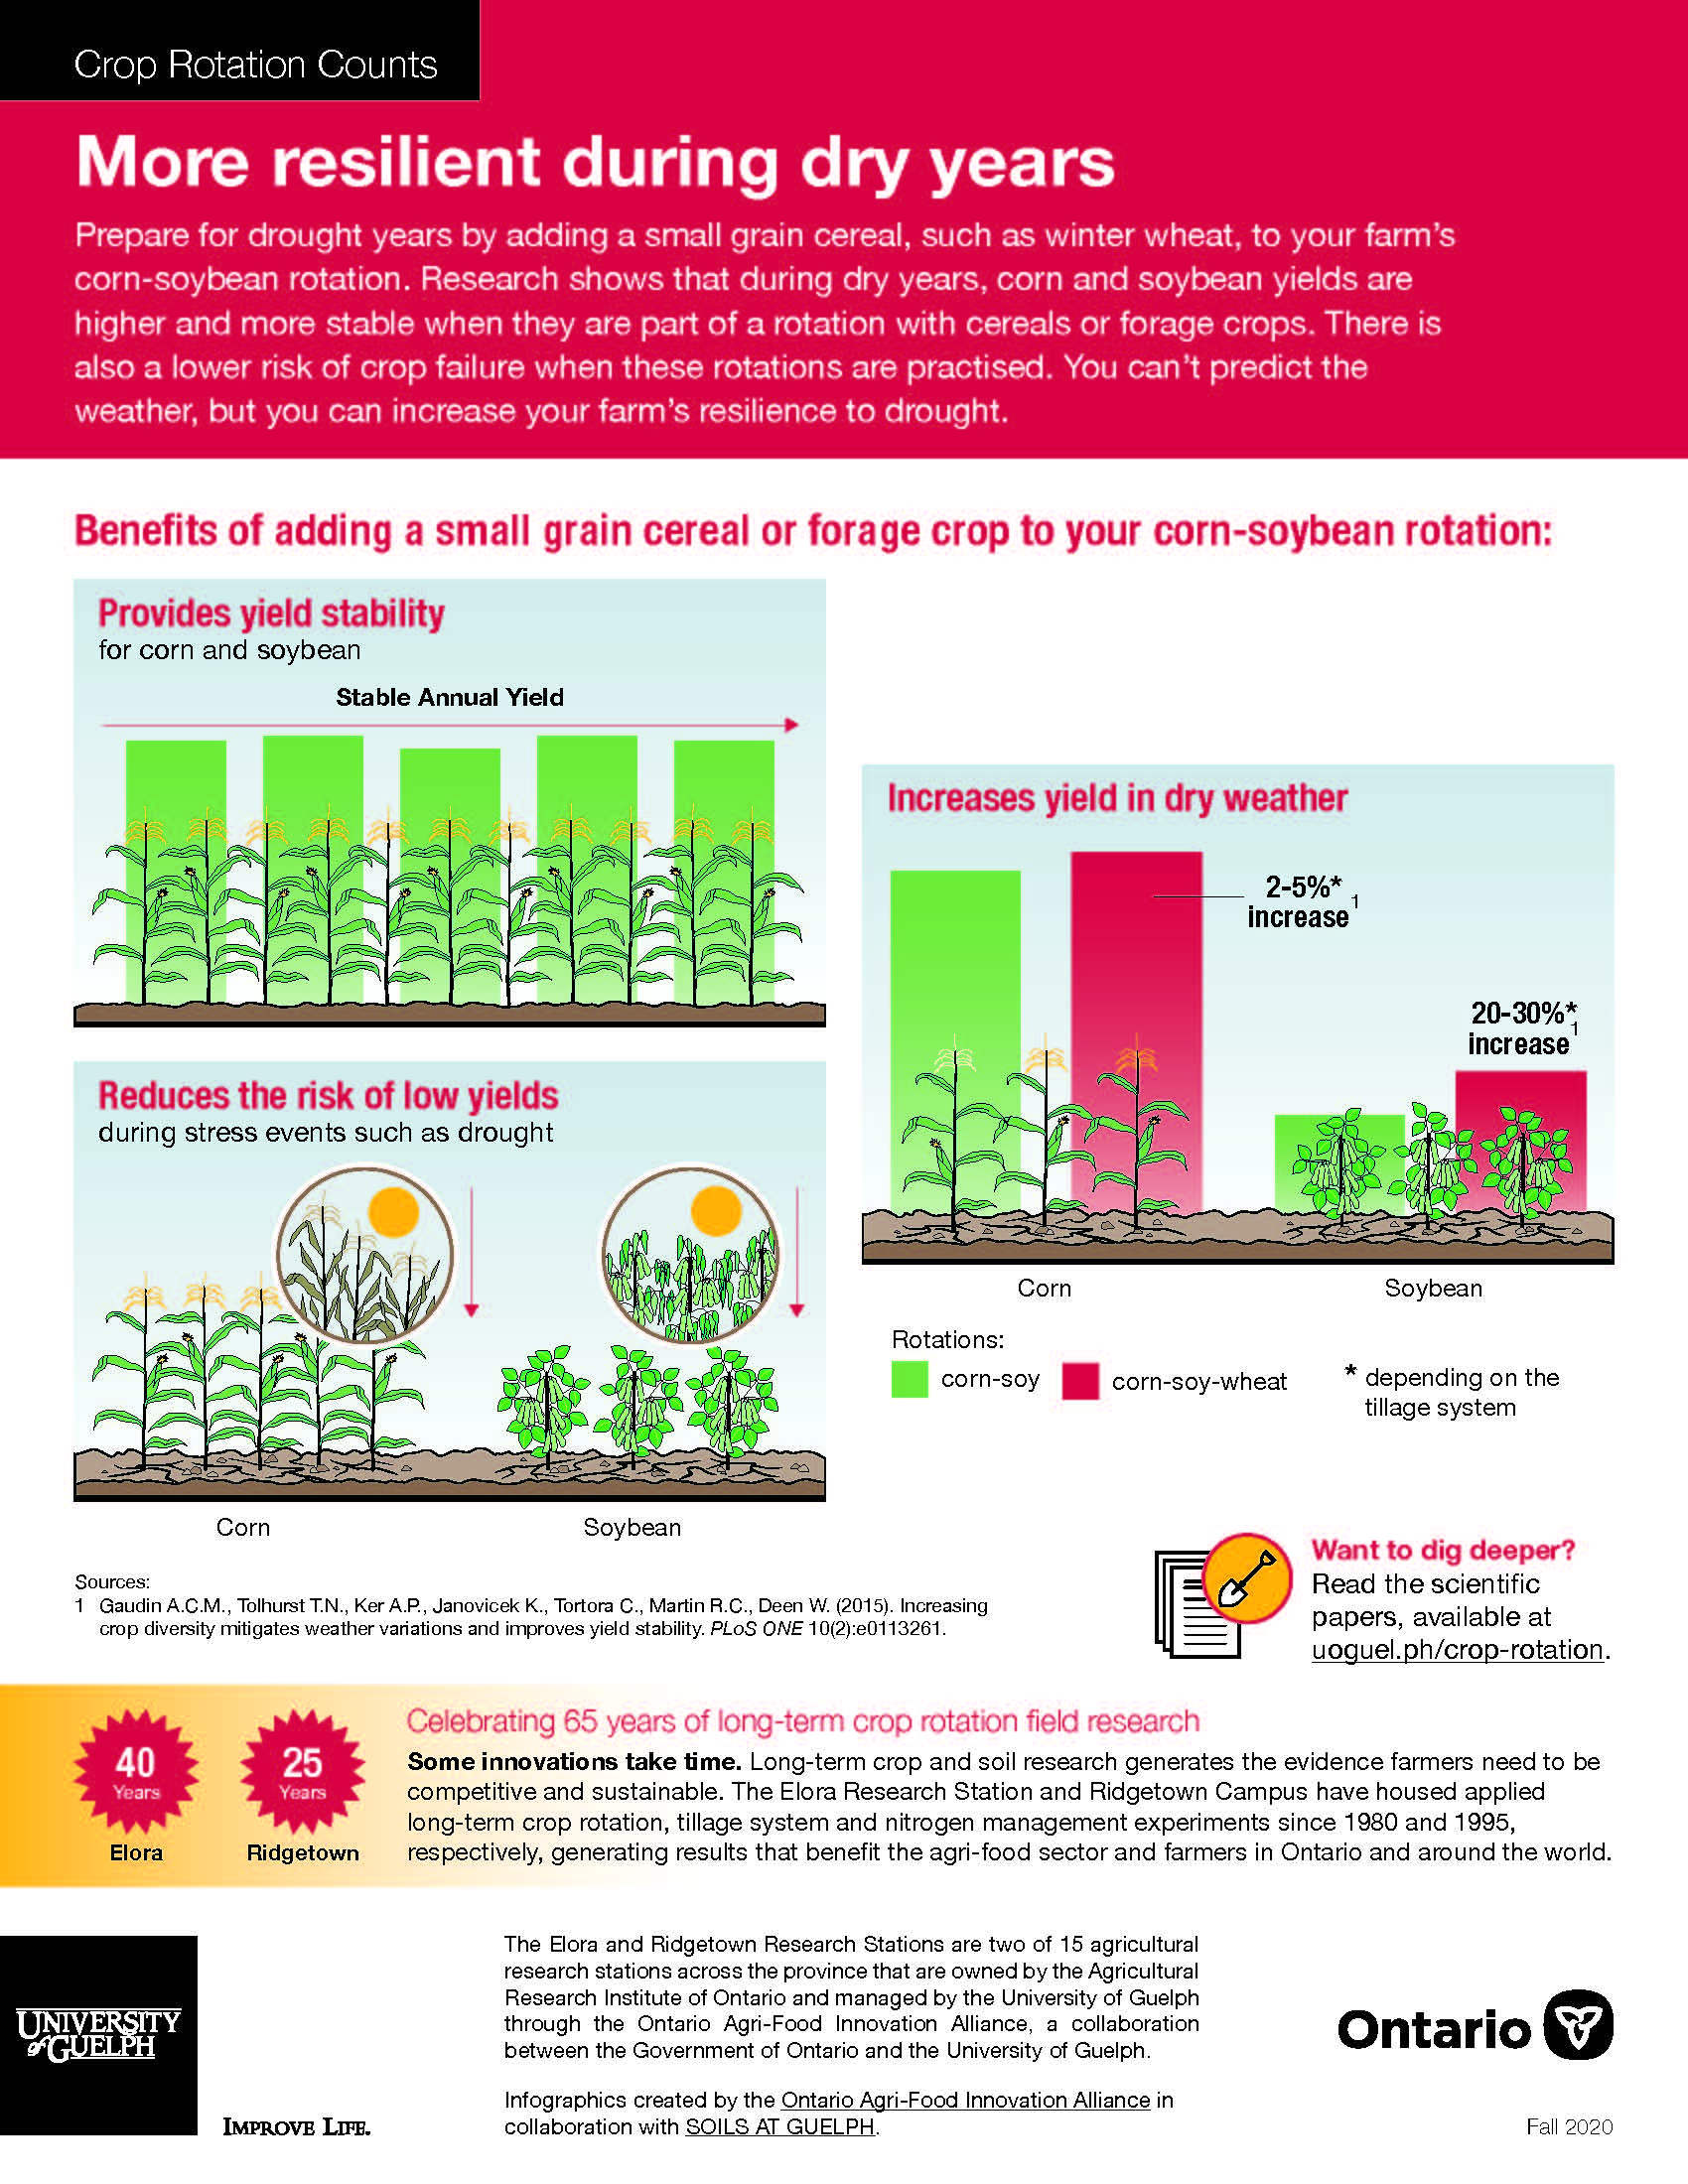 Crop rotation counts infographic: More resilient during drought years. Text version below.